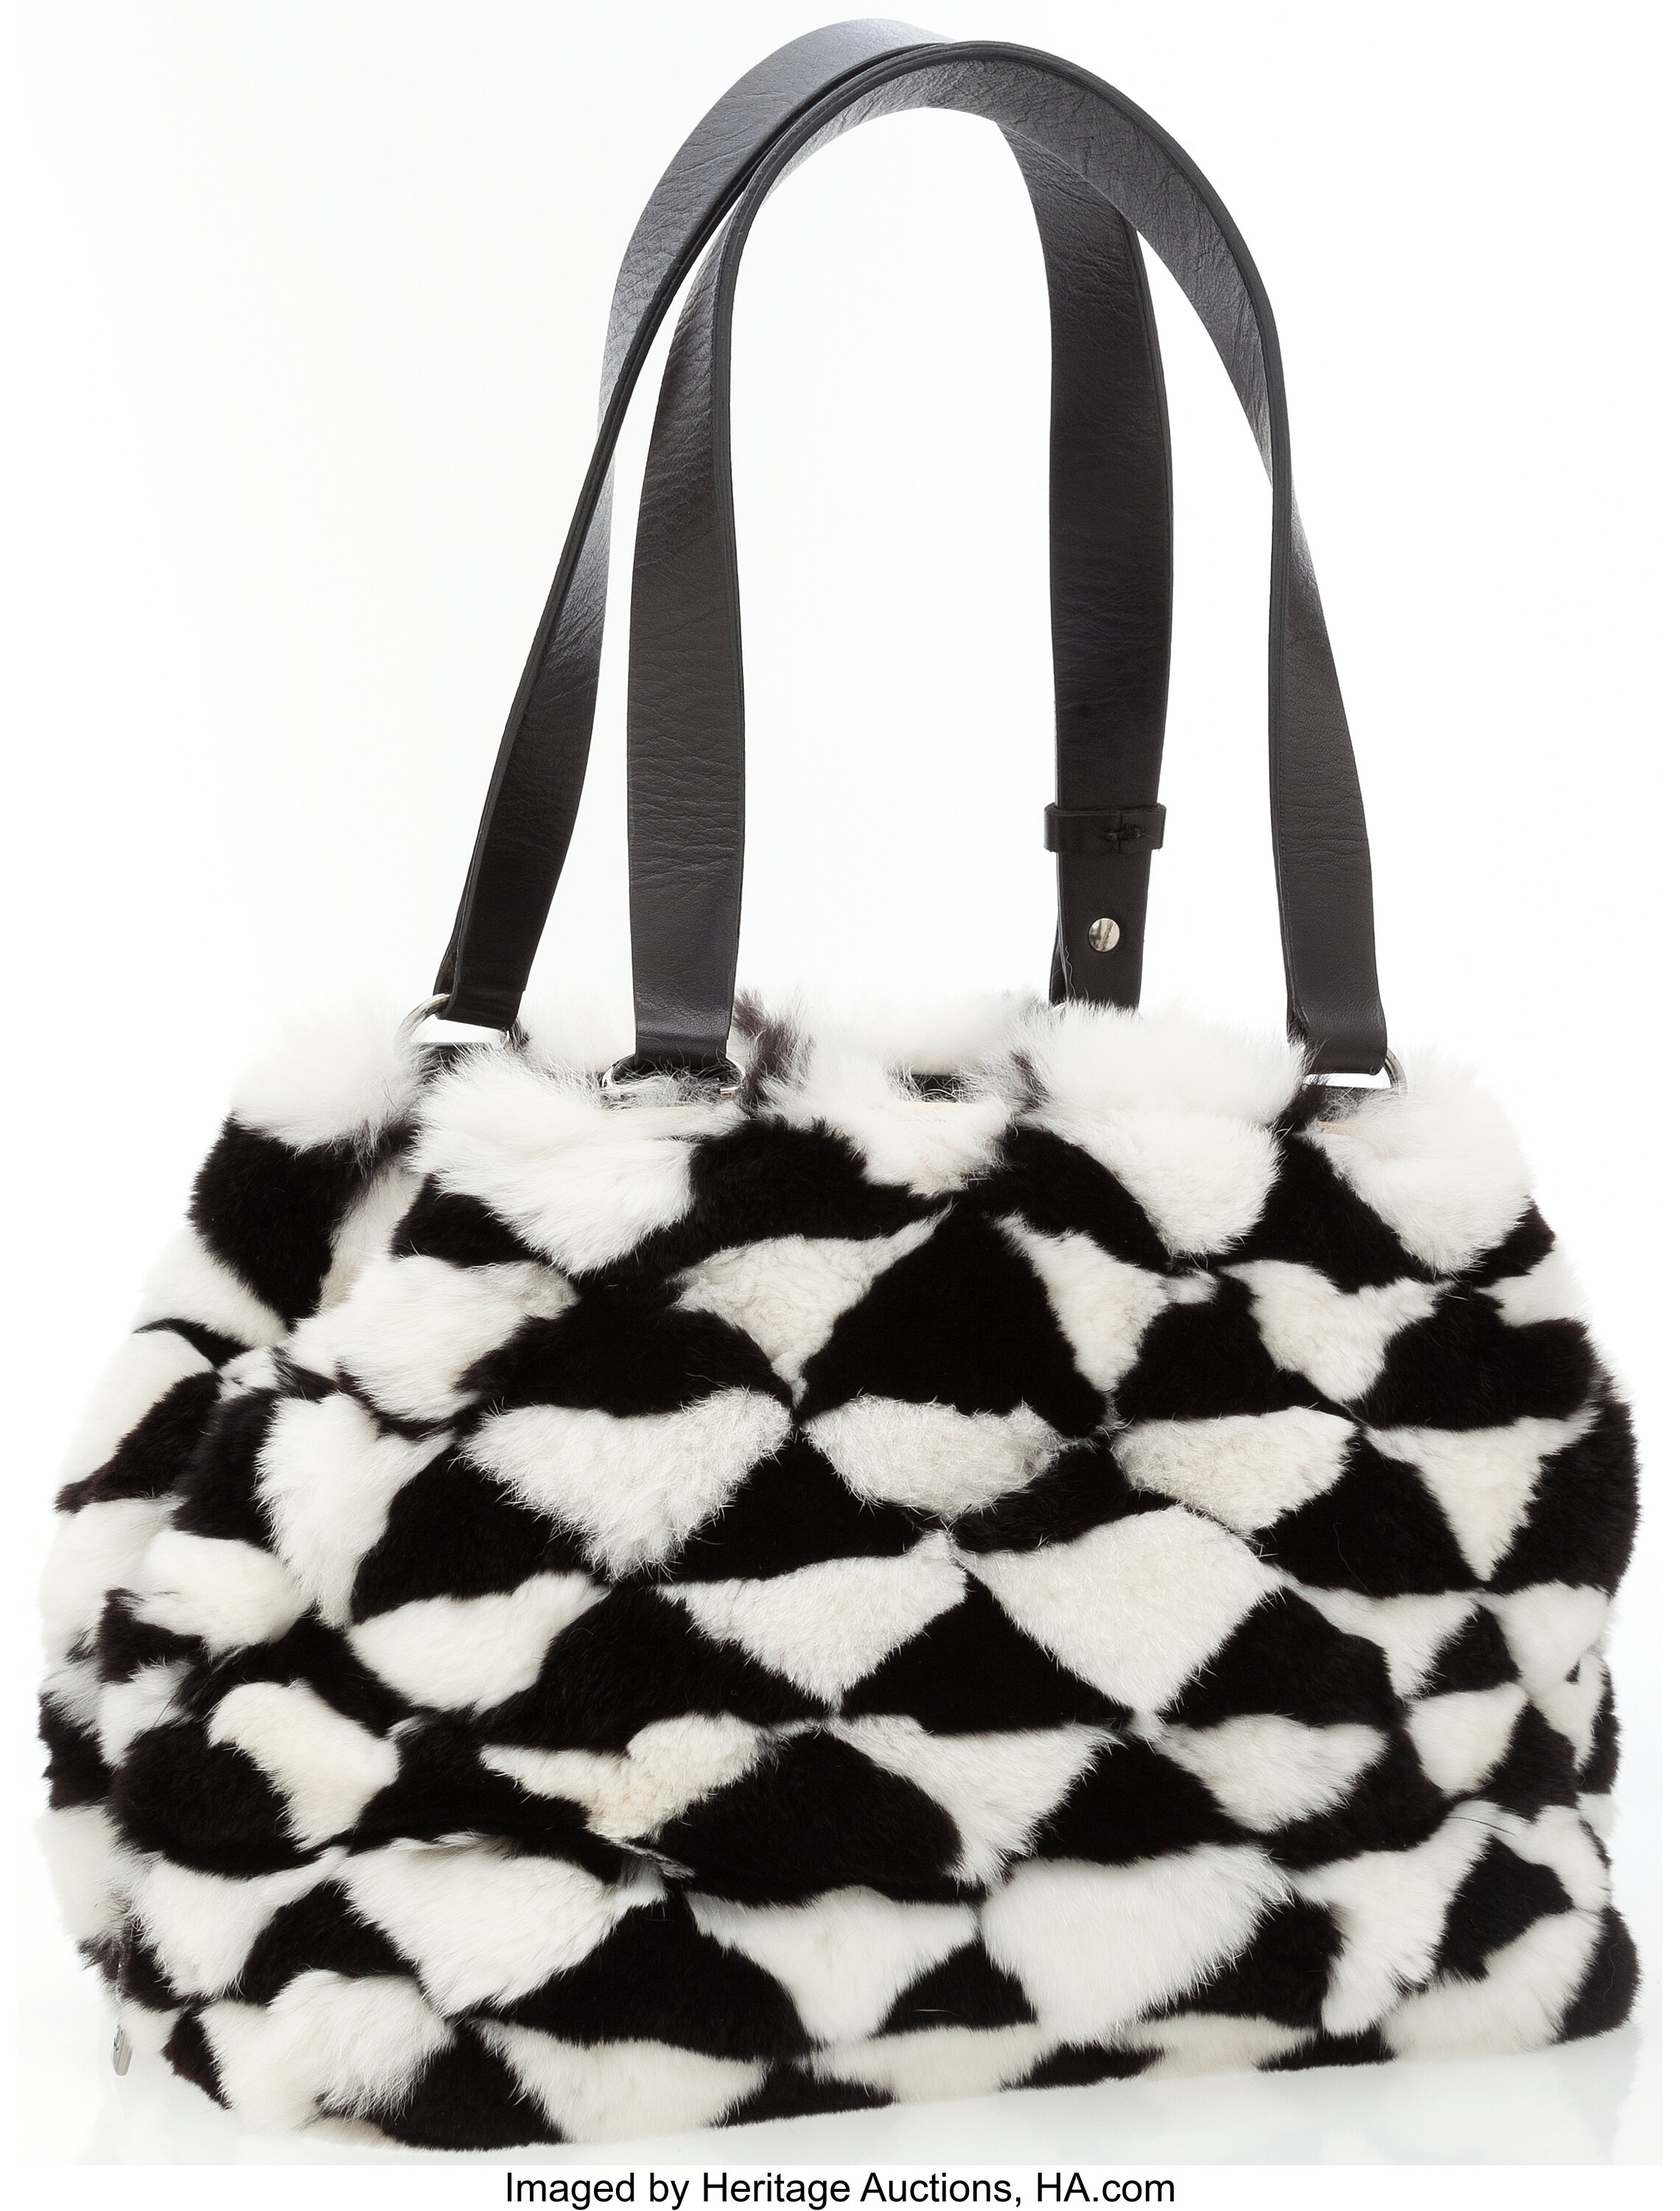 Chanel Black and White Checkered Fur Bag with Black Leather